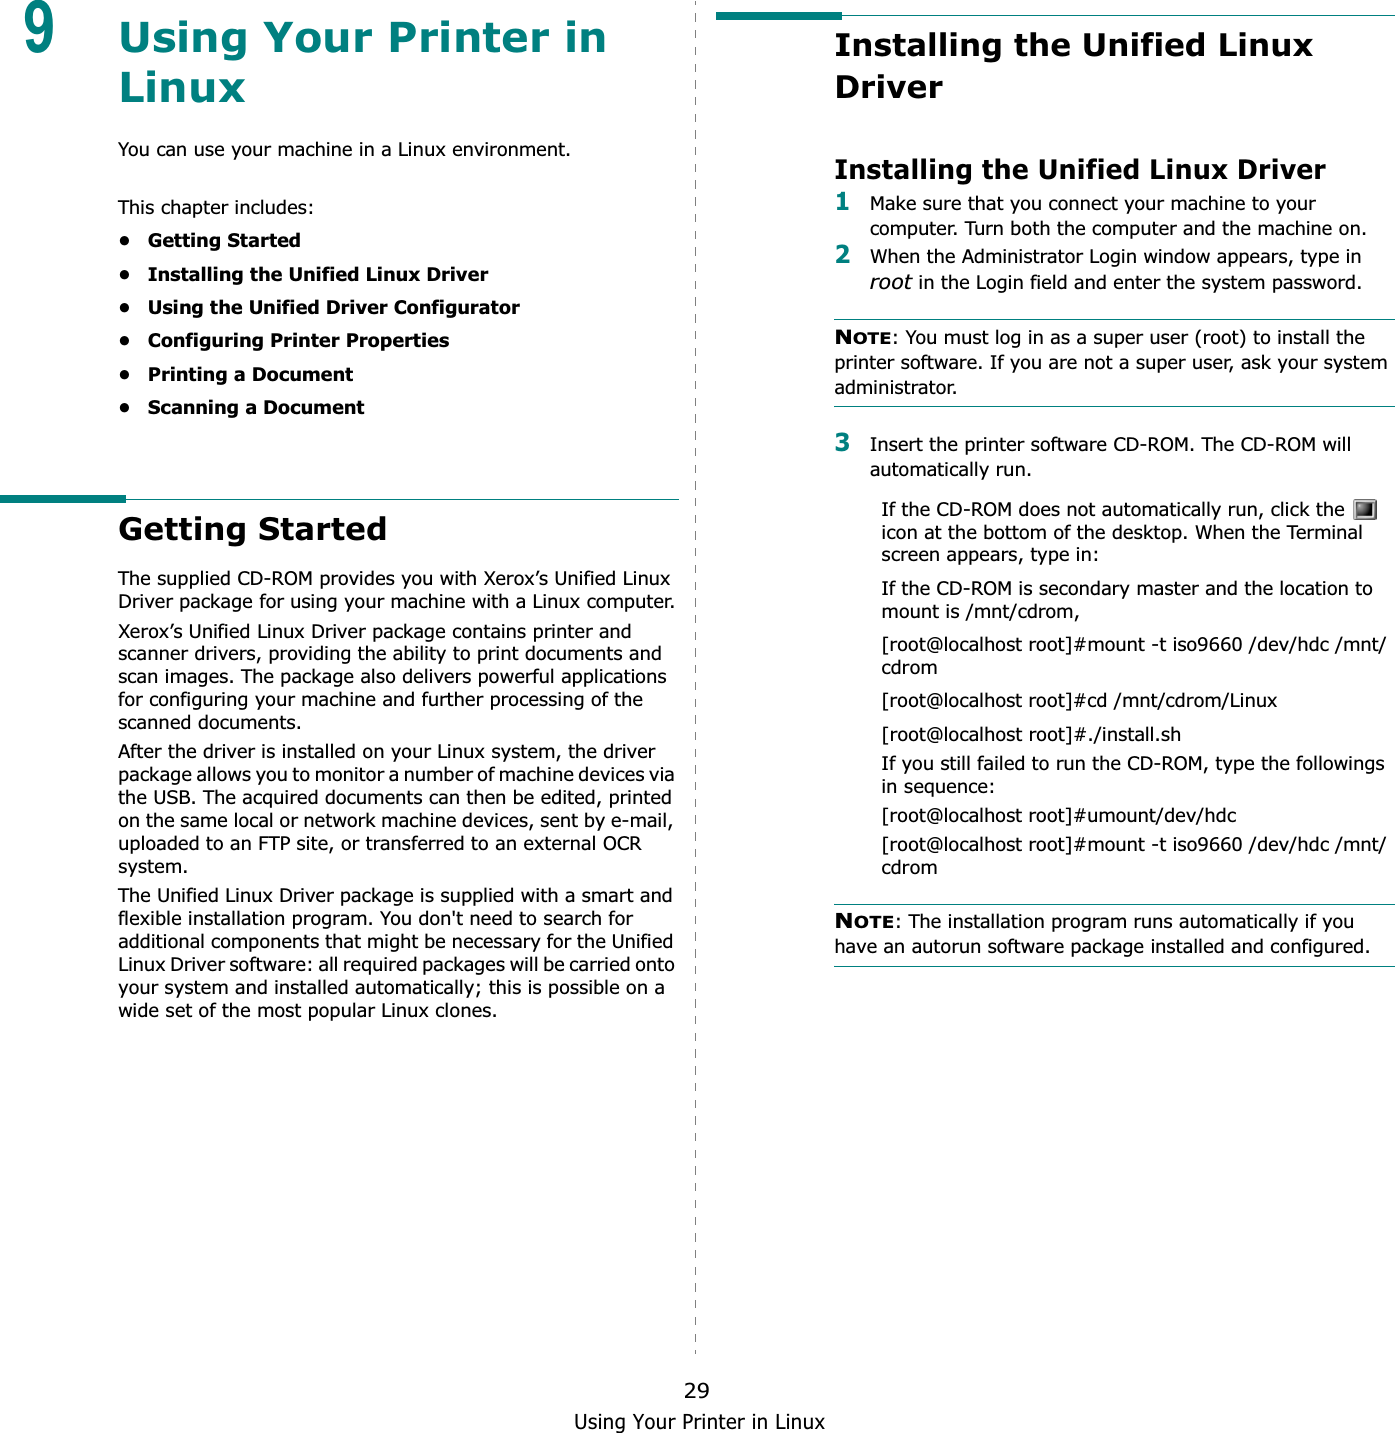 Using Your Printer in Linux299Using Your Printer in LinuxYou can use your machine in a Linux environment. This chapter includes:• Getting Started• Installing the Unified Linux Driver• Using the Unified Driver Configurator• Configuring Printer Properties• Printing a Document• Scanning a DocumentGetting StartedThe supplied CD-ROM provides you with Xerox’s Unified Linux Driver package for using your machine with a Linux computer.Xerox’s Unified Linux Driver package contains printer and scanner drivers, providing the ability to print documents and scan images. The package also delivers powerful applications for configuring your machine and further processing of the scanned documents.After the driver is installed on your Linux system, the driver package allows you to monitor a number of machine devices via the USB. The acquired documents can then be edited, printed on the same local or network machine devices, sent by e-mail, uploaded to an FTP site, or transferred to an external OCR system.The Unified Linux Driver package is supplied with a smart and flexible installation program. You don&apos;t need to search for additional components that might be necessary for the Unified Linux Driver software: all required packages will be carried onto your system and installed automatically; this is possible on a wide set of the most popular Linux clones.Installing the Unified Linux DriverInstalling the Unified Linux Driver1Make sure that you connect your machine to your computer. Turn both the computer and the machine on.2When the Administrator Login window appears, type in root in the Login field and enter the system password.NOTE: You must log in as a super user (root) to install the printer software. If you are not a super user, ask your system administrator.3Insert the printer software CD-ROM. The CD-ROM will automatically run.If the CD-ROM does not automatically run, click the   icon at the bottom of the desktop. When the Terminal screen appears, type in:If the CD-ROM is secondary master and the location to mount is /mnt/cdrom,[root@localhost root]#mount -t iso9660 /dev/hdc /mnt/cdrom[root@localhost root]#cd /mnt/cdrom/Linux[root@localhost root]#./install.sh If you still failed to run the CD-ROM, type the followings in sequence:[root@localhost root]#umount/dev/hdc[root@localhost root]#mount -t iso9660 /dev/hdc /mnt/cdromNOTE: The installation program runs automatically if you have an autorun software package installed and configured.